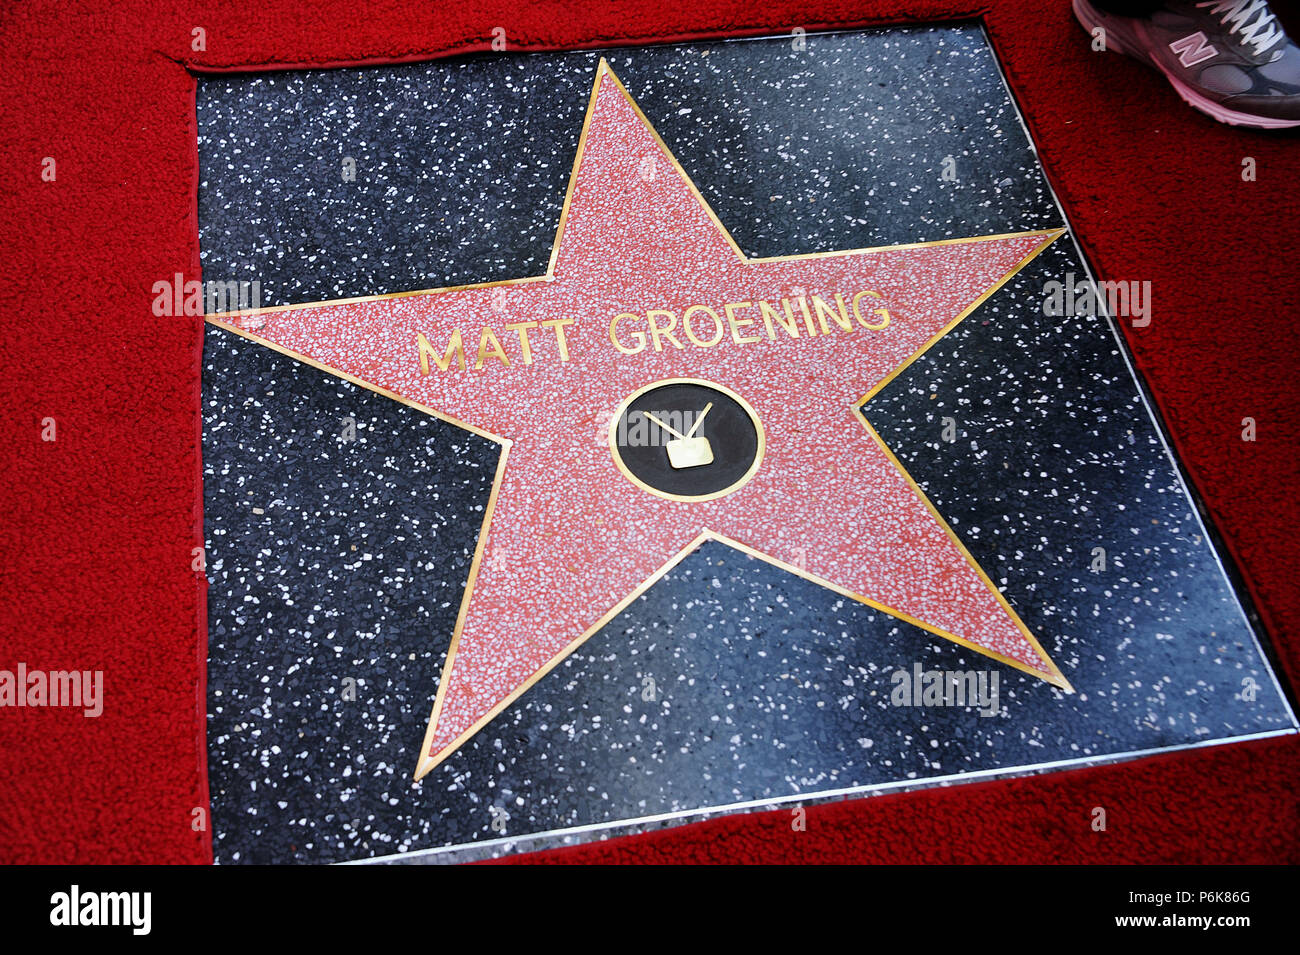 Matt Groening honored with a Star on the Hollywood Walk of Fame In Los Angeles.Matt Groening star  108  Event in Hollywood Life - California, Red Carpet Event, USA, Film Industry, Celebrities, Photography, Bestof, Arts Culture and Entertainment, Topix Celebrities fashion, Best of, Hollywood Life, Event in Hollywood Life - California, movie celebrities, TV celebrities, Music celebrities, Topix, Bestof, Arts Culture and Entertainment, Photography,    inquiry tsuni@Gamma-USA.com , Credit Tsuni / USA, Honored with a Star on the Hollywood Walk ofFame in Los Angeles,  2012 Stock Photo